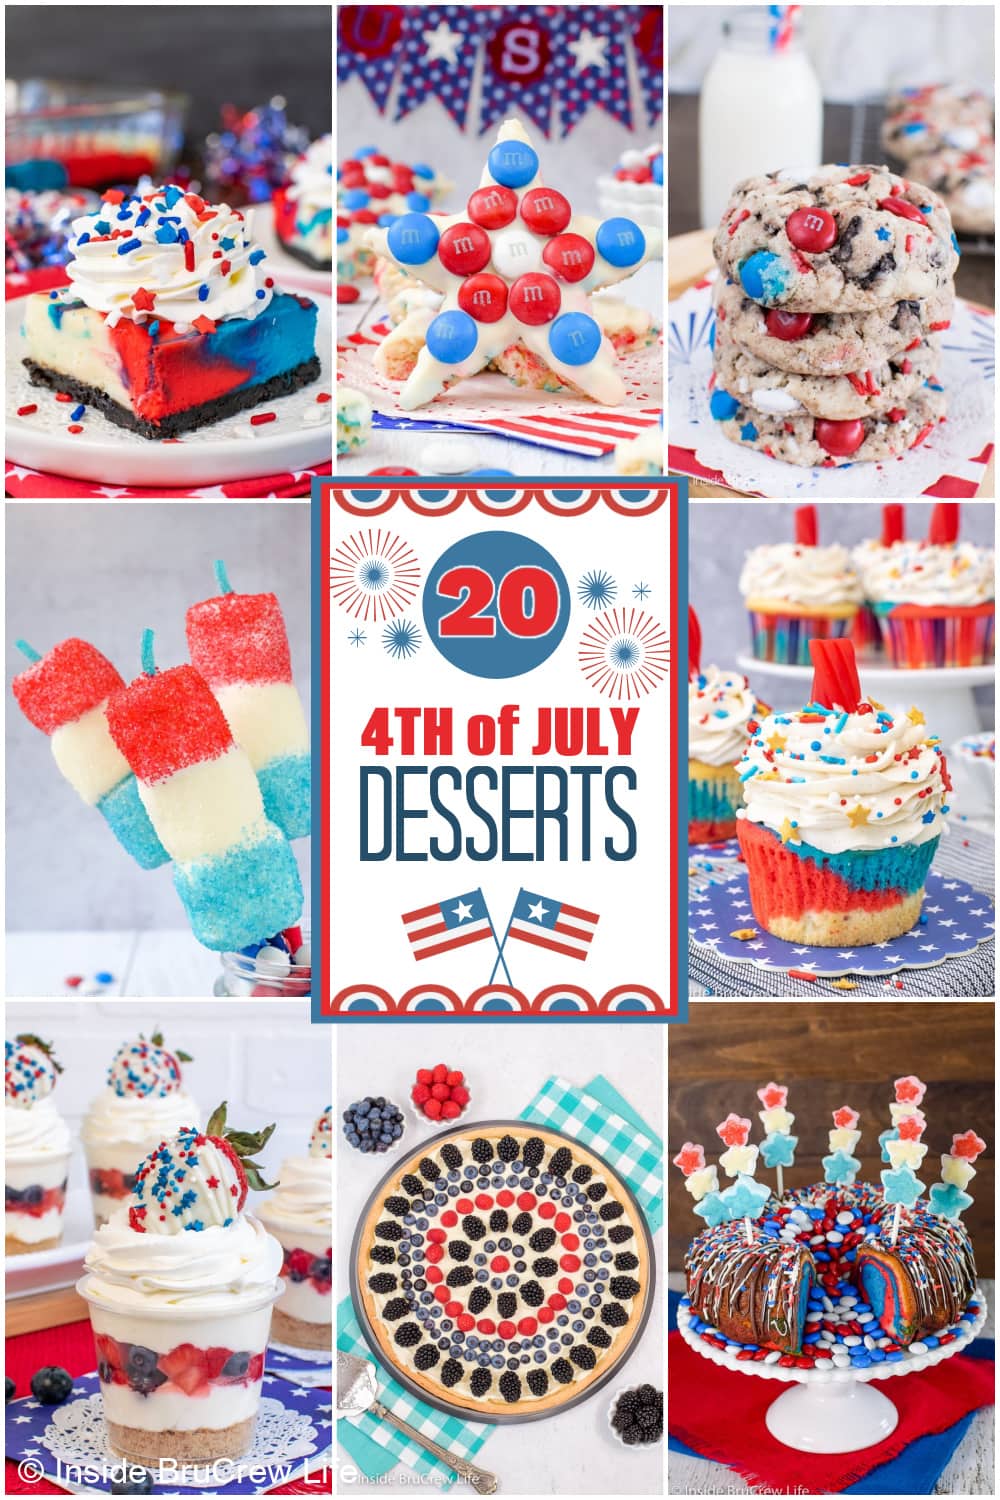 8 pictures of red white and blue desserts collaged together with a text box.